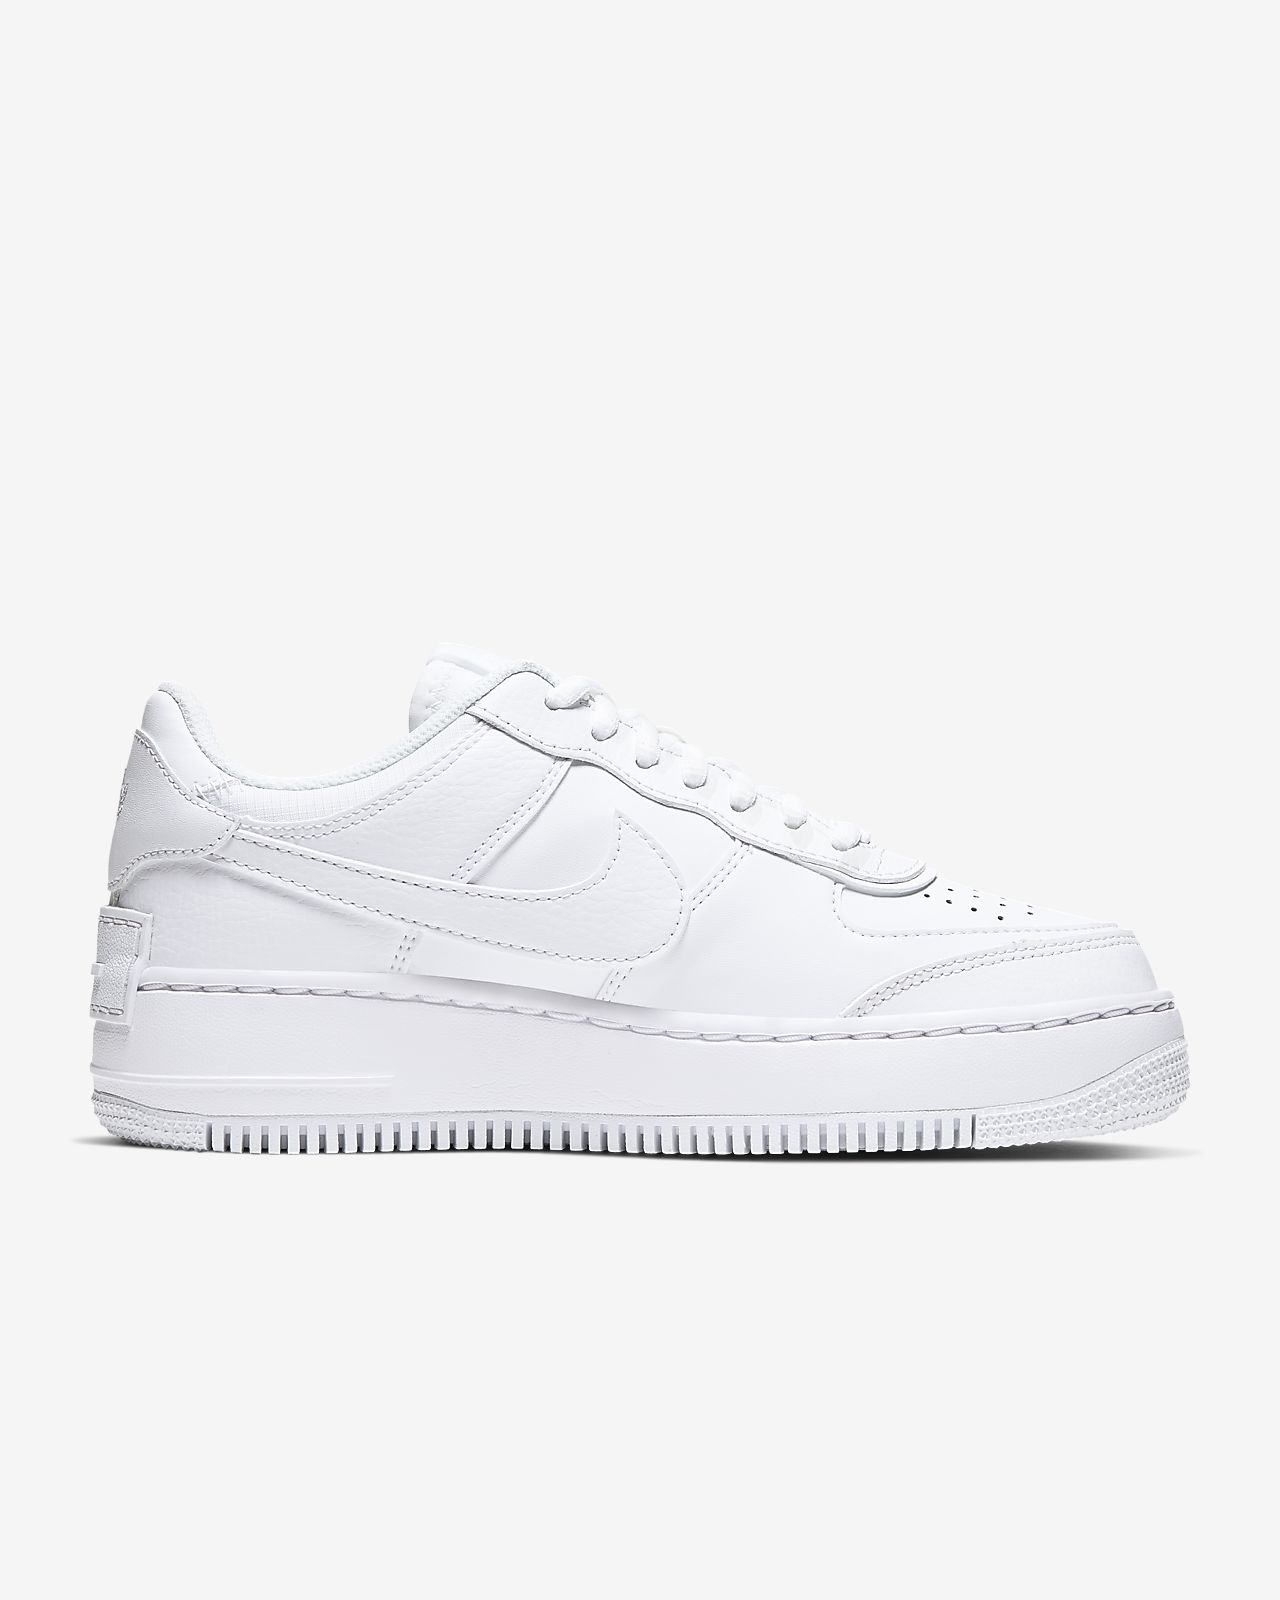 nike air force femme blanche